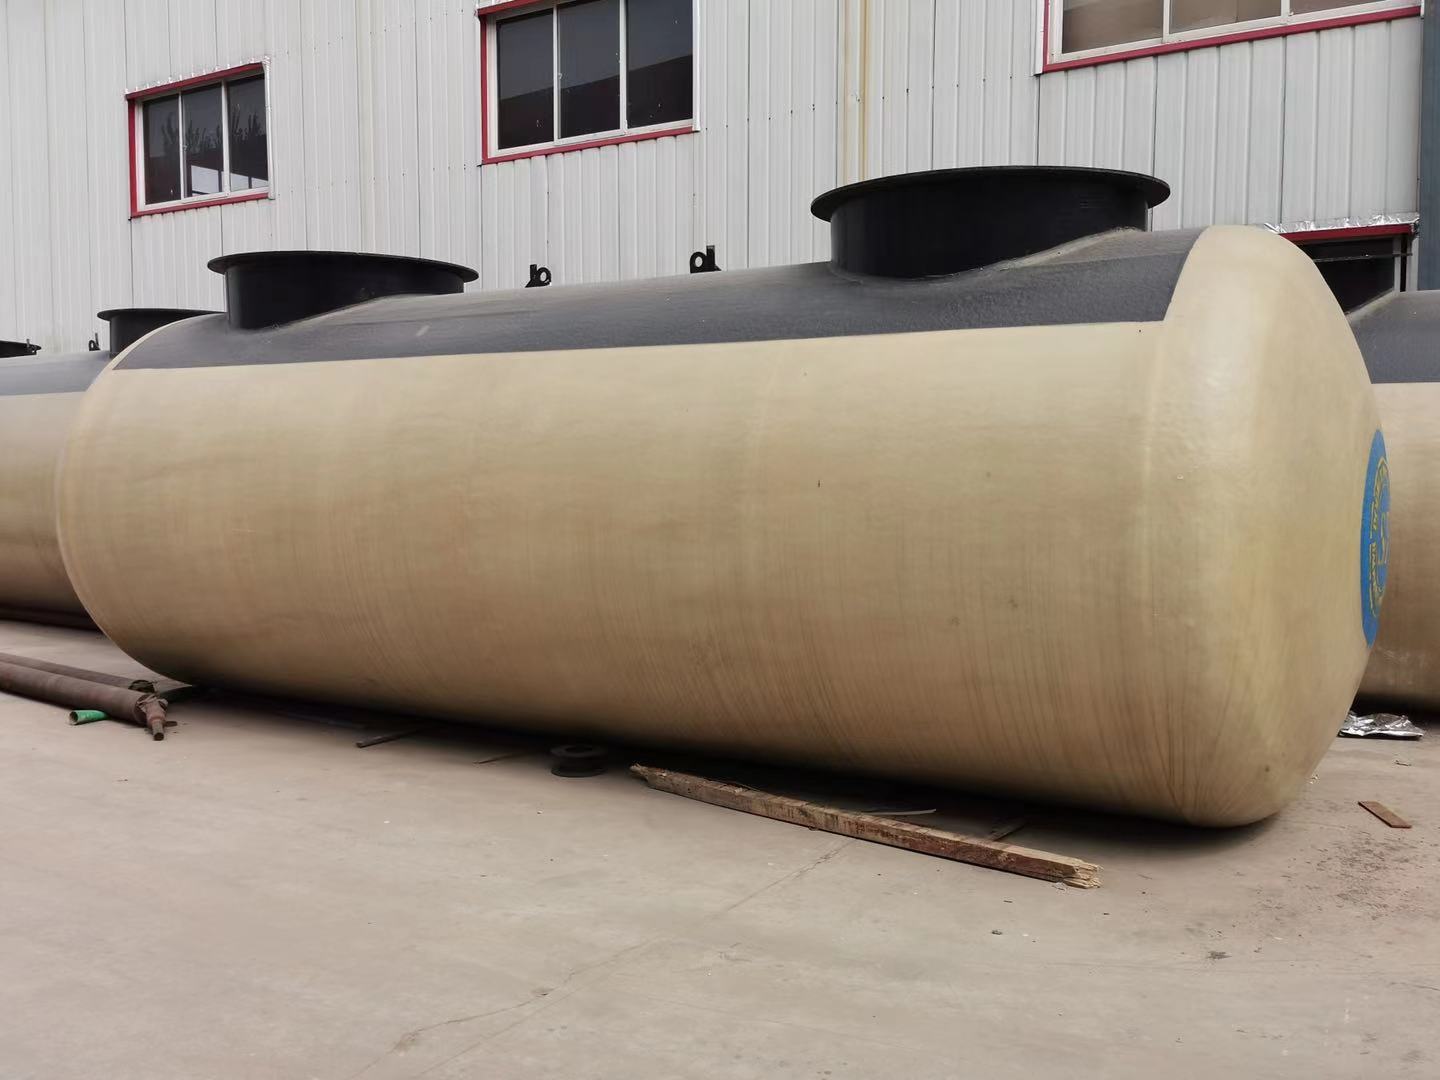 About SF underground double layer oil tank